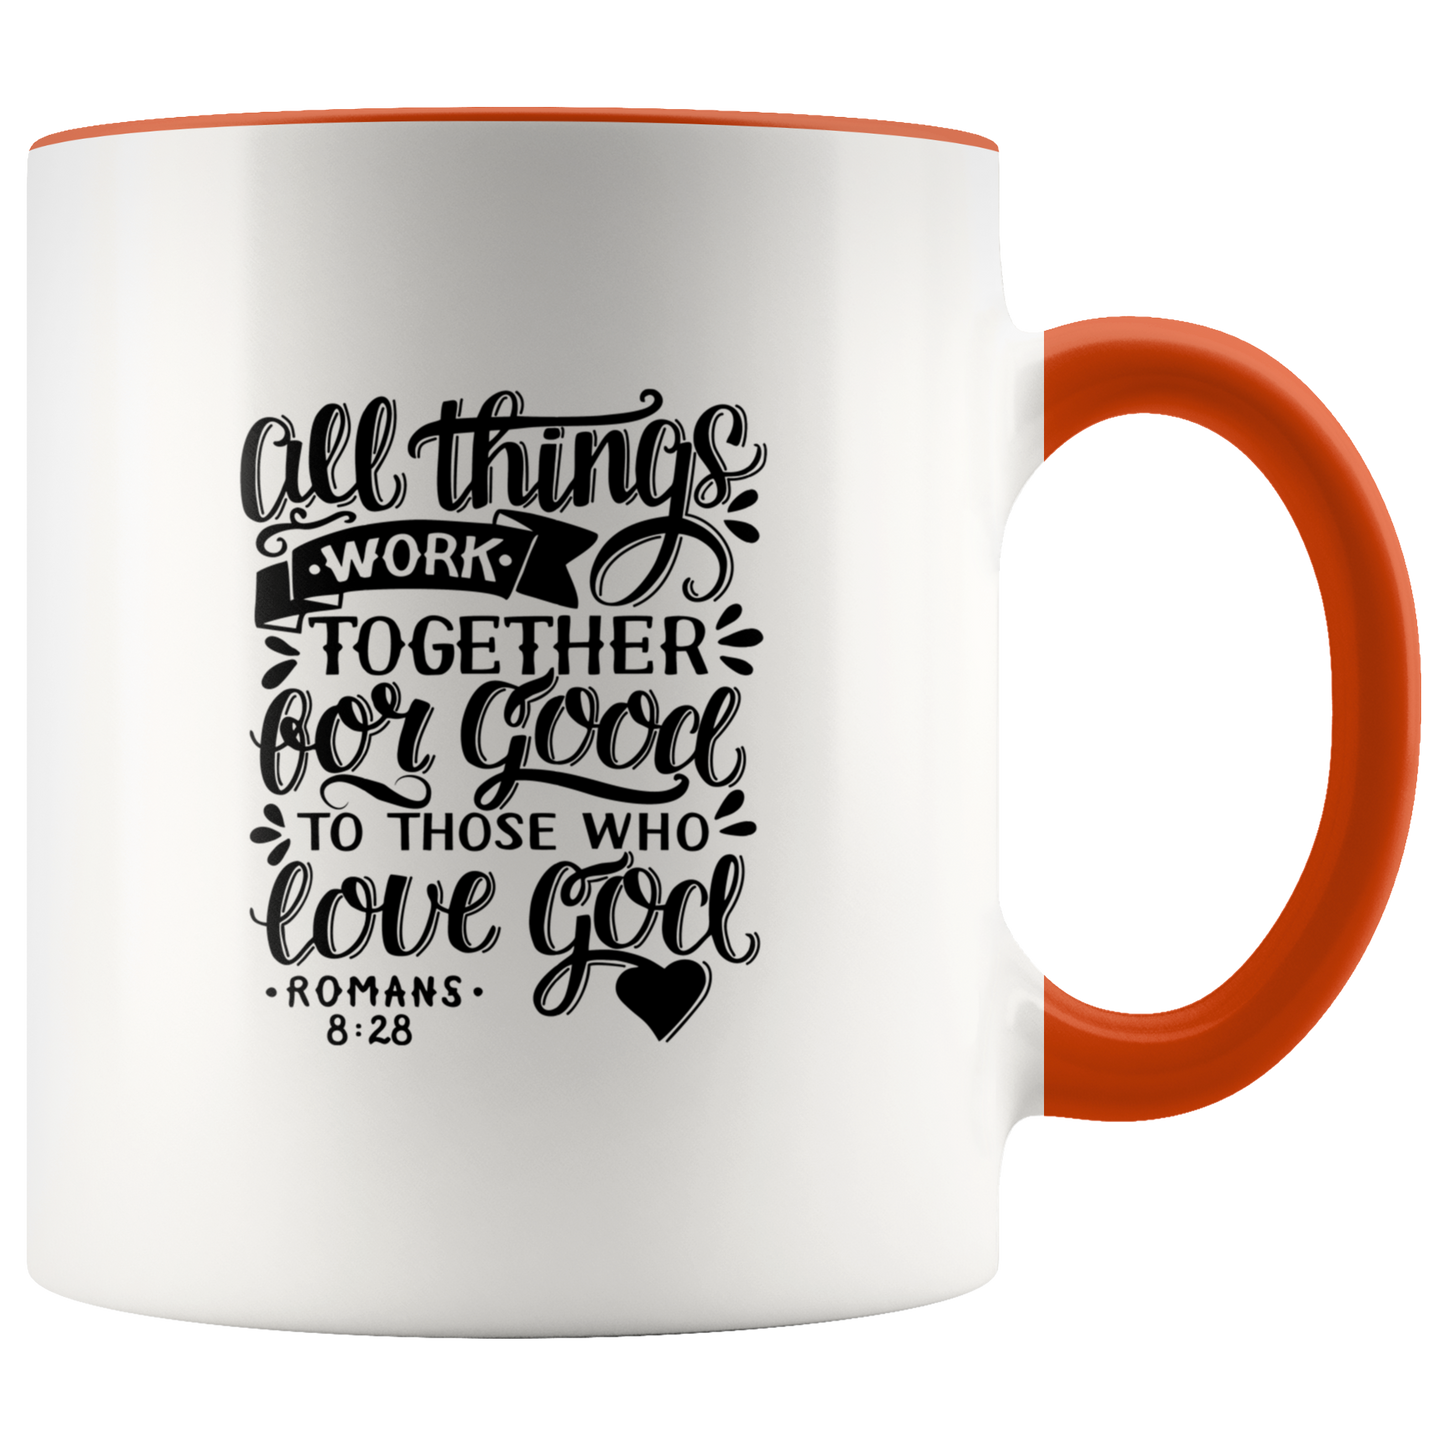 All Things Work Together For Good To Those Who Love God, Romans 8:28 - Accent Mug orange